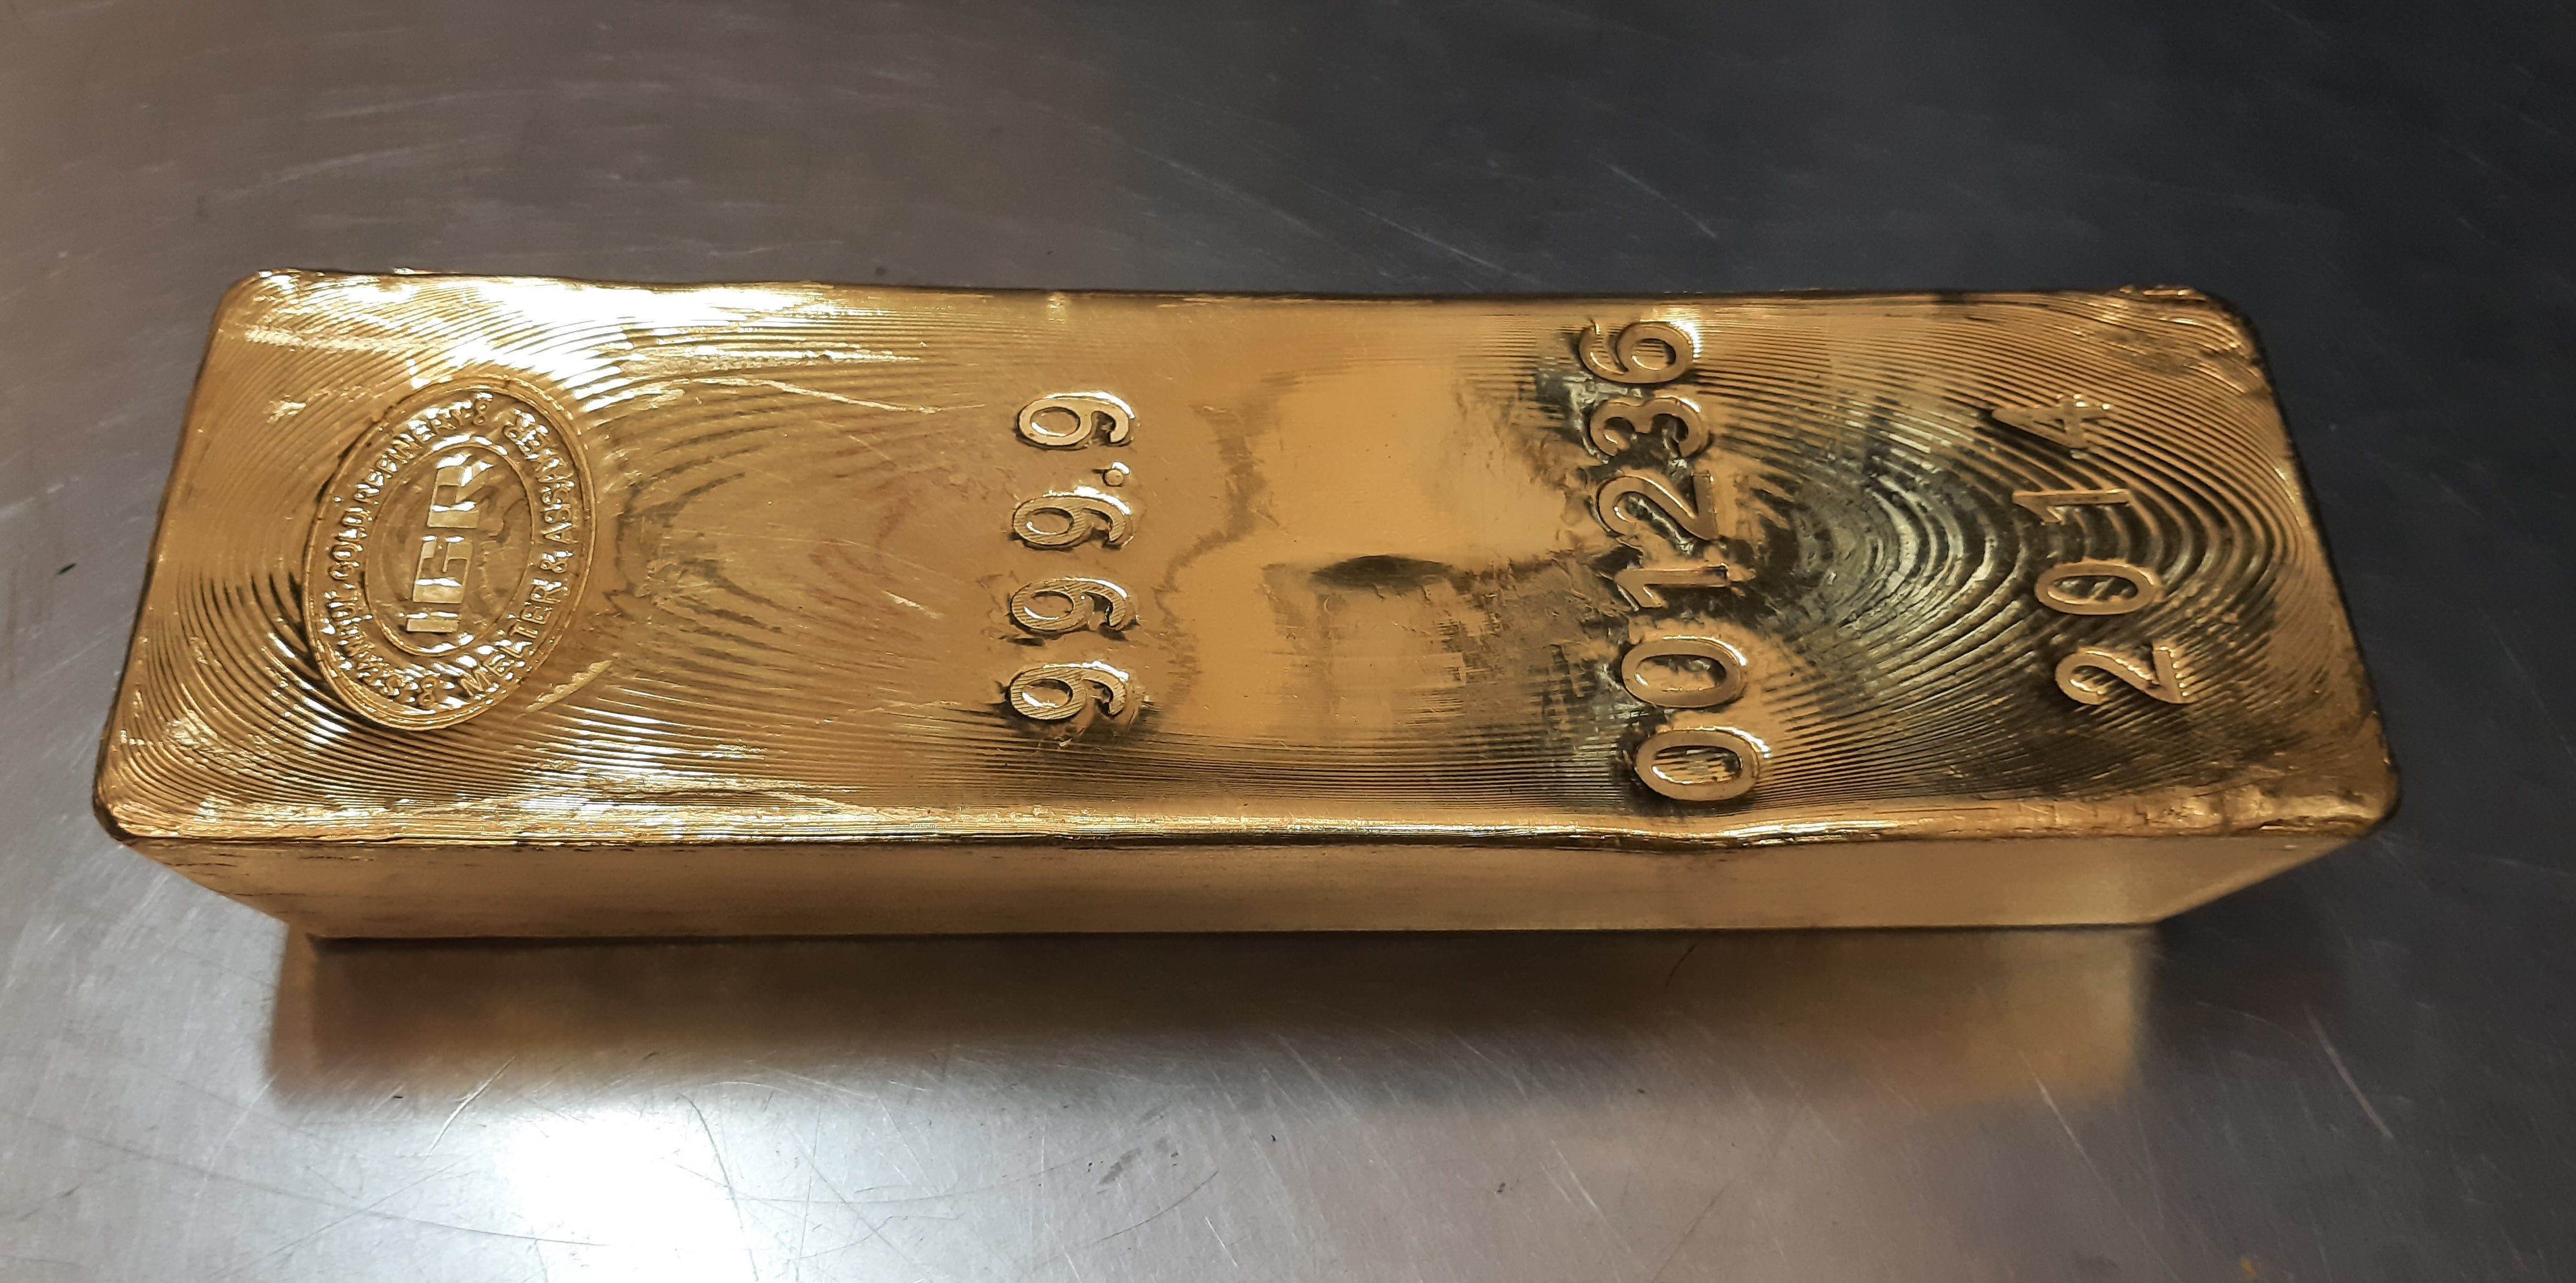 Gold bar 99.99% pure gold wholesale bar in a vault